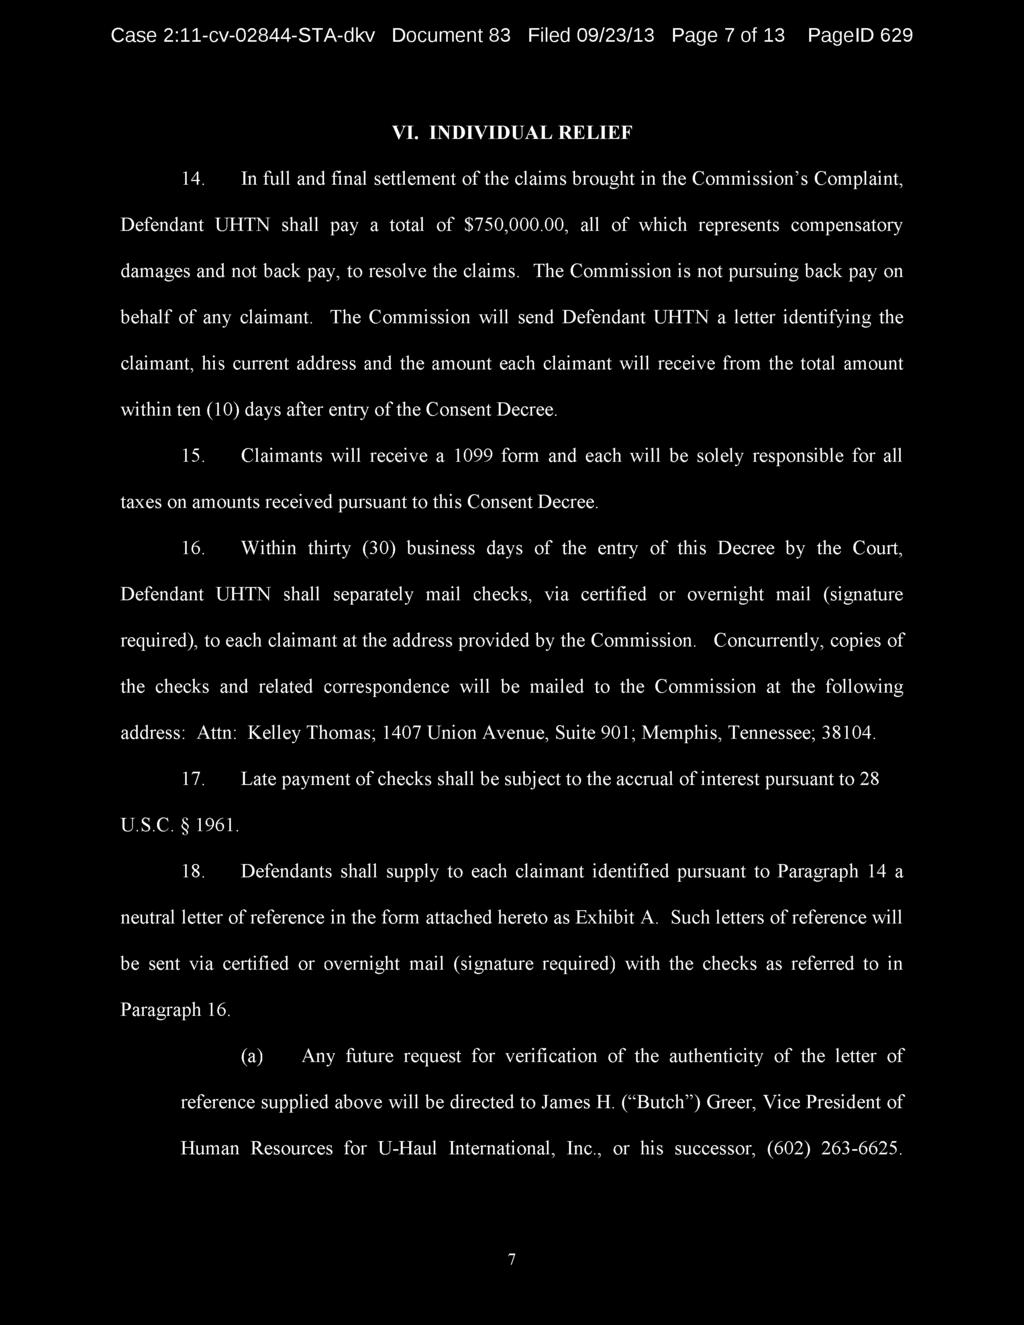 Case 2:11-cv-02844-STA-dkv Document 83 Filed 09/23/13 Page 7 of 13 PagelD 629 VI. INDIVIDUAL RELIEF 14.